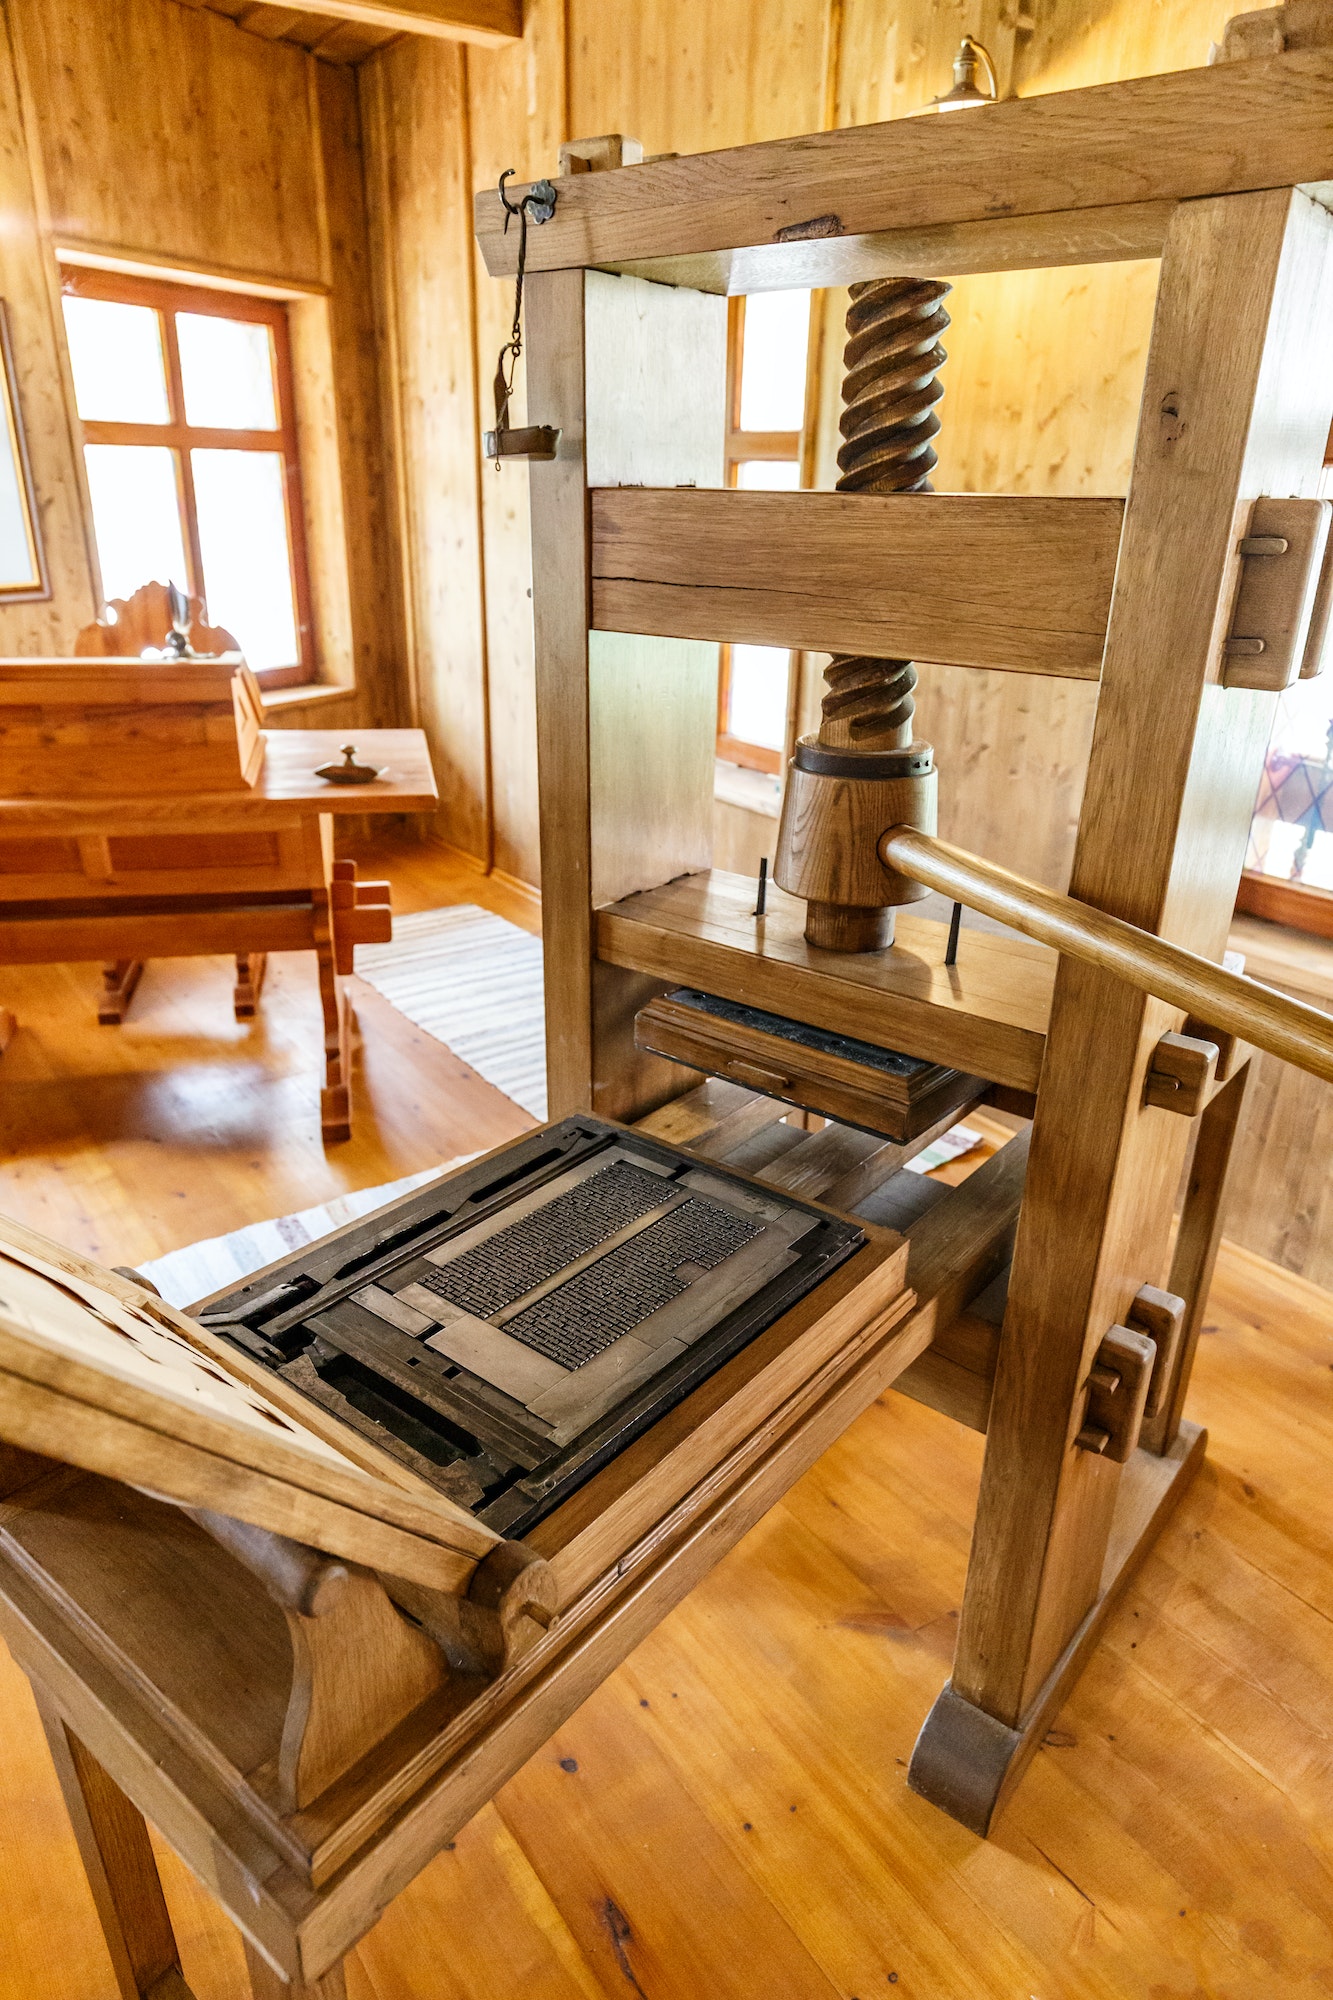 Old wooden printing press